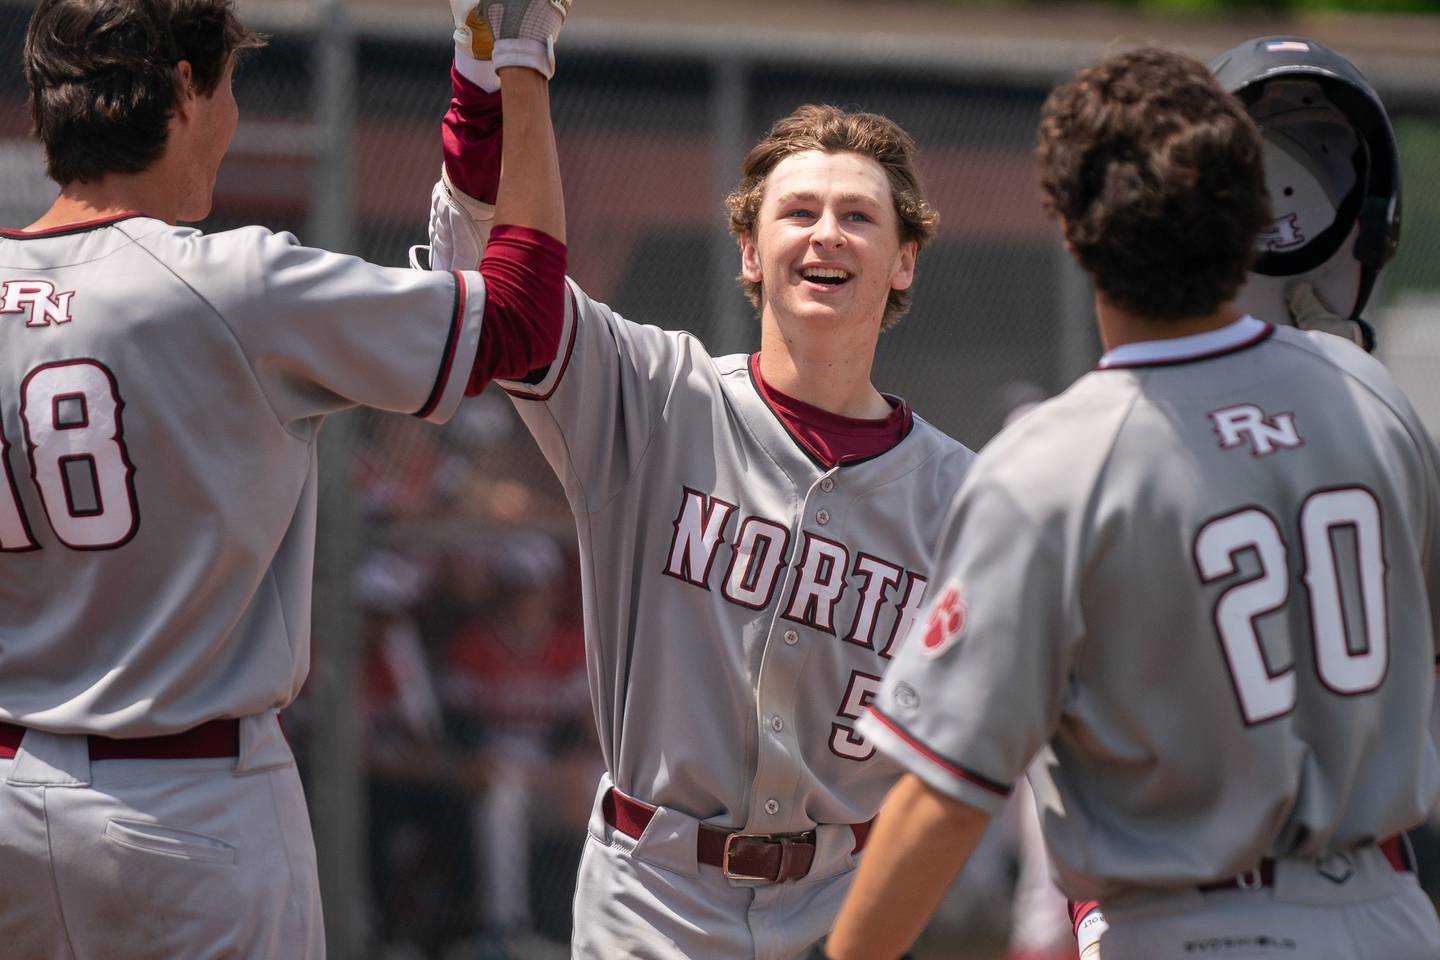 Plainfield North's Ryan Nelson (5) is greeted at home plate after hitting a two run homer against Yorkville during the Class 4A Yorkville Regional baseball final at Yorkville High School on Saturday, May 28, 2022.